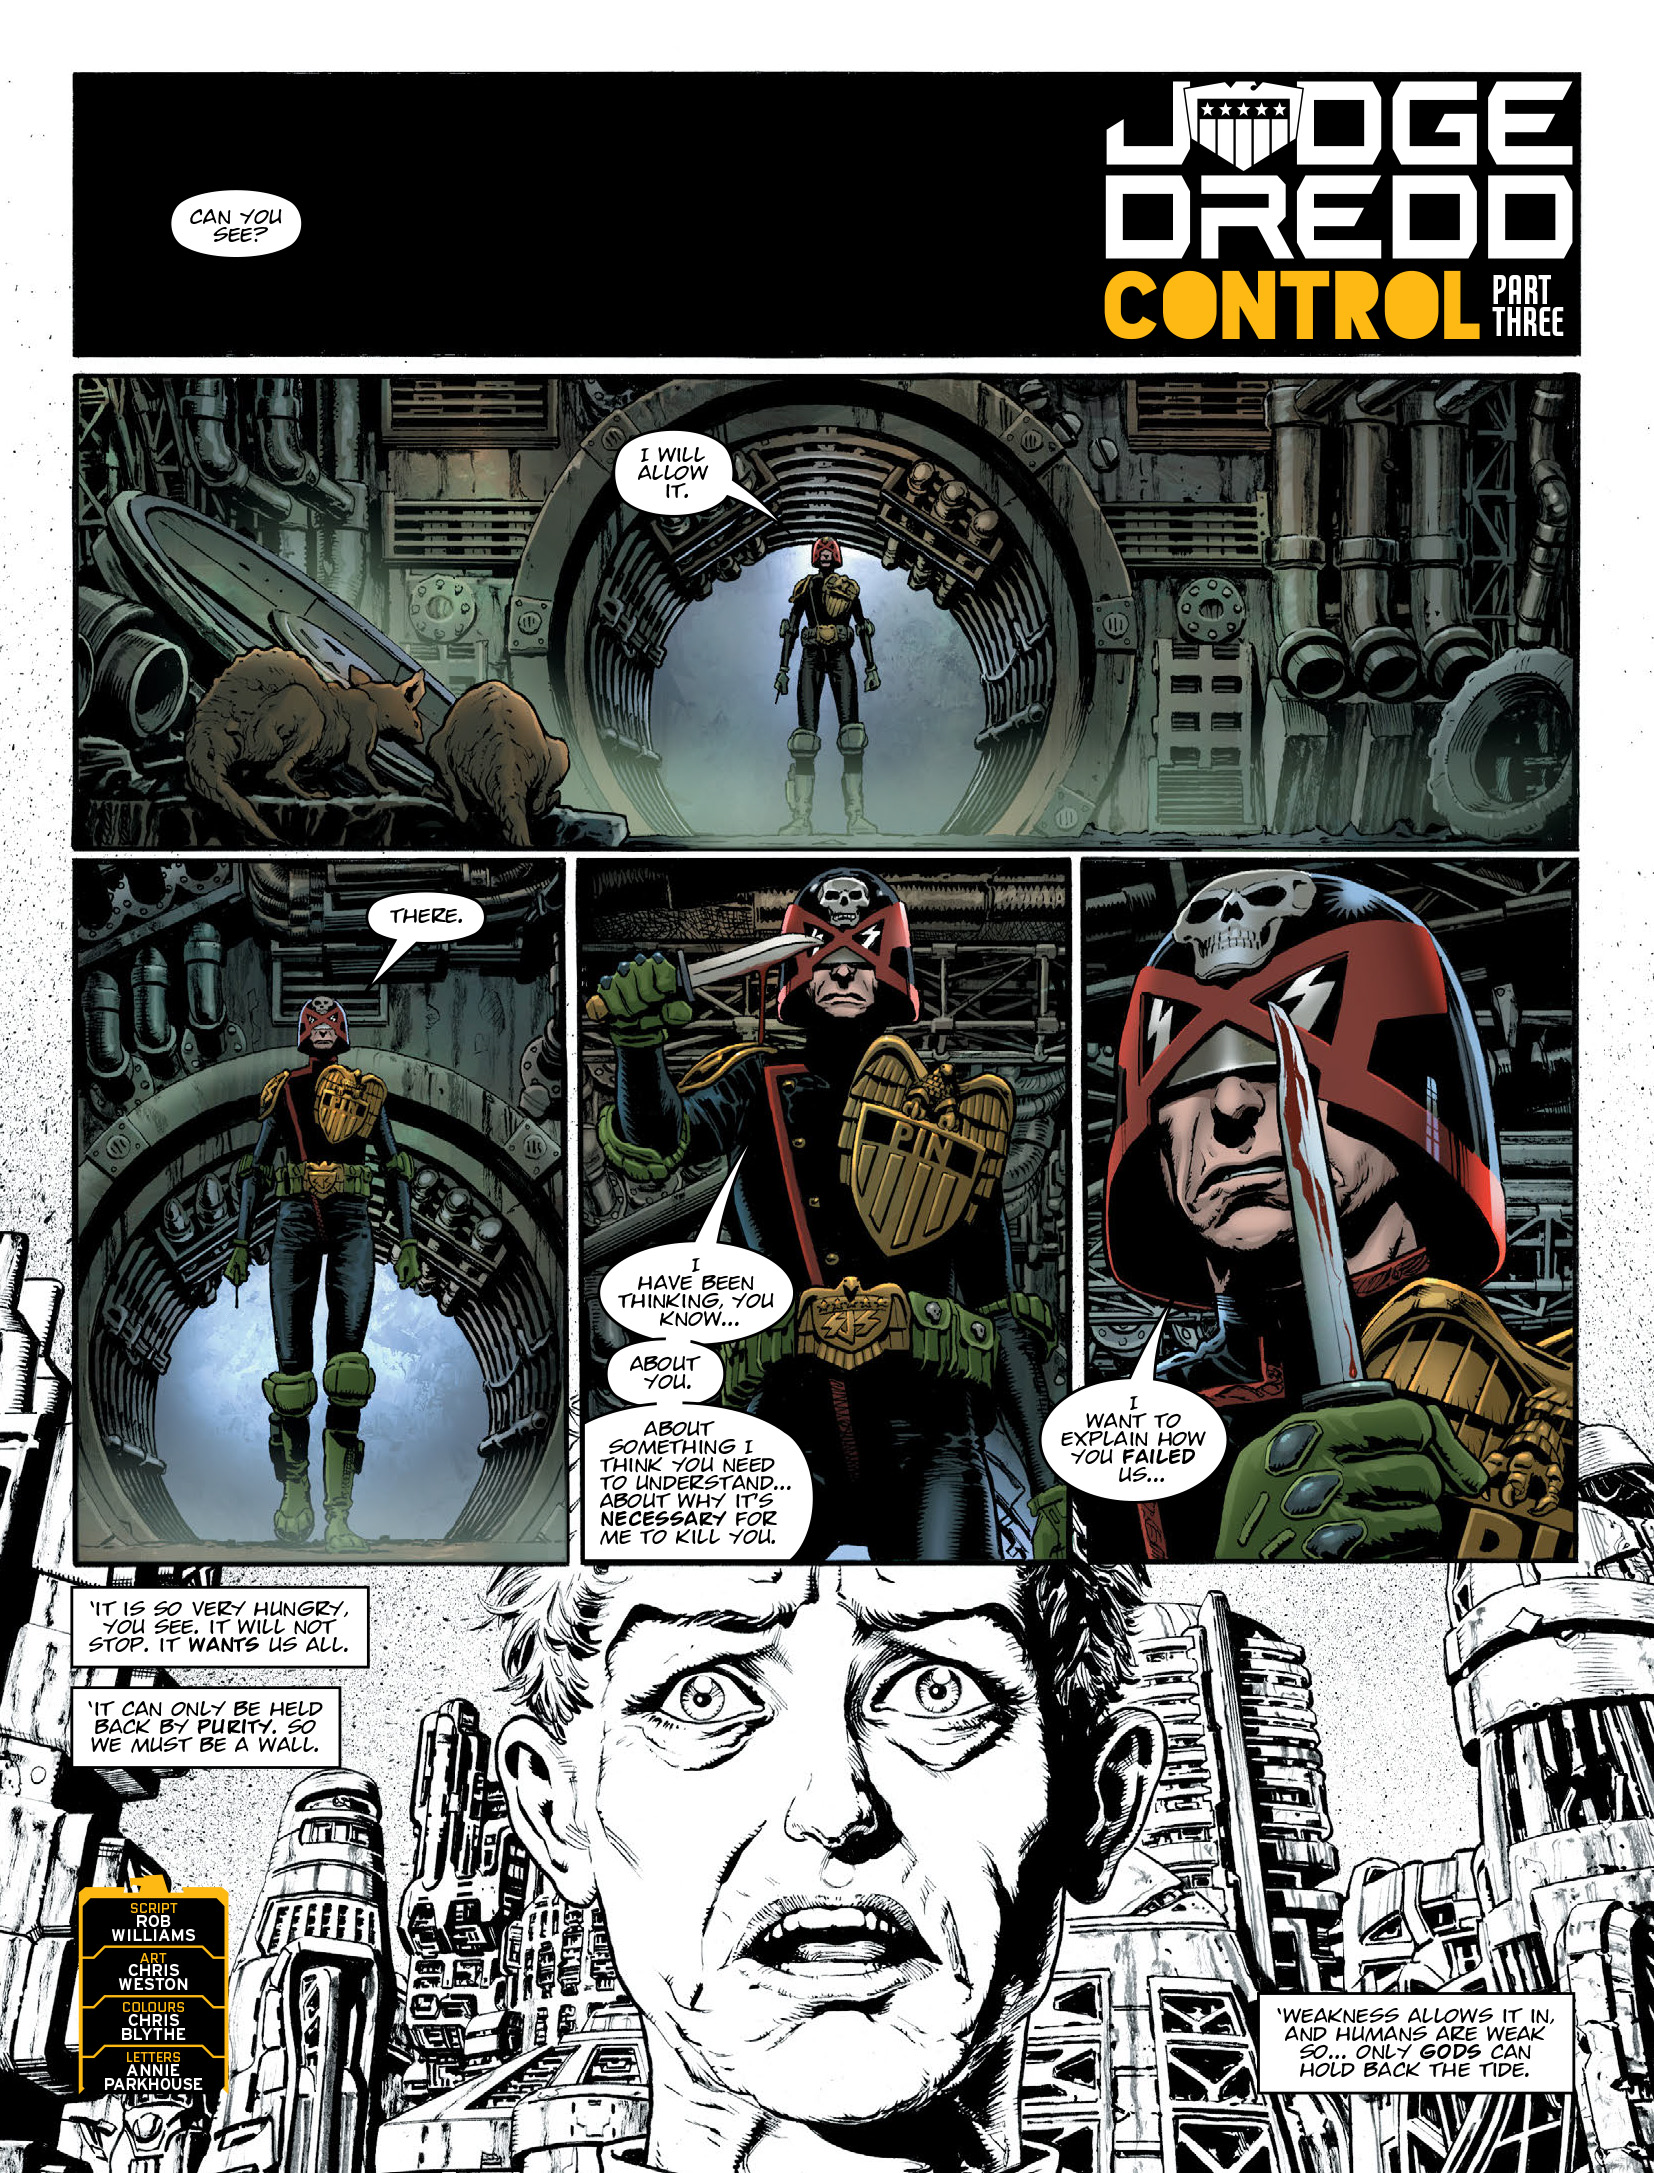 2000 AD: Chapter 2143 - Page 3